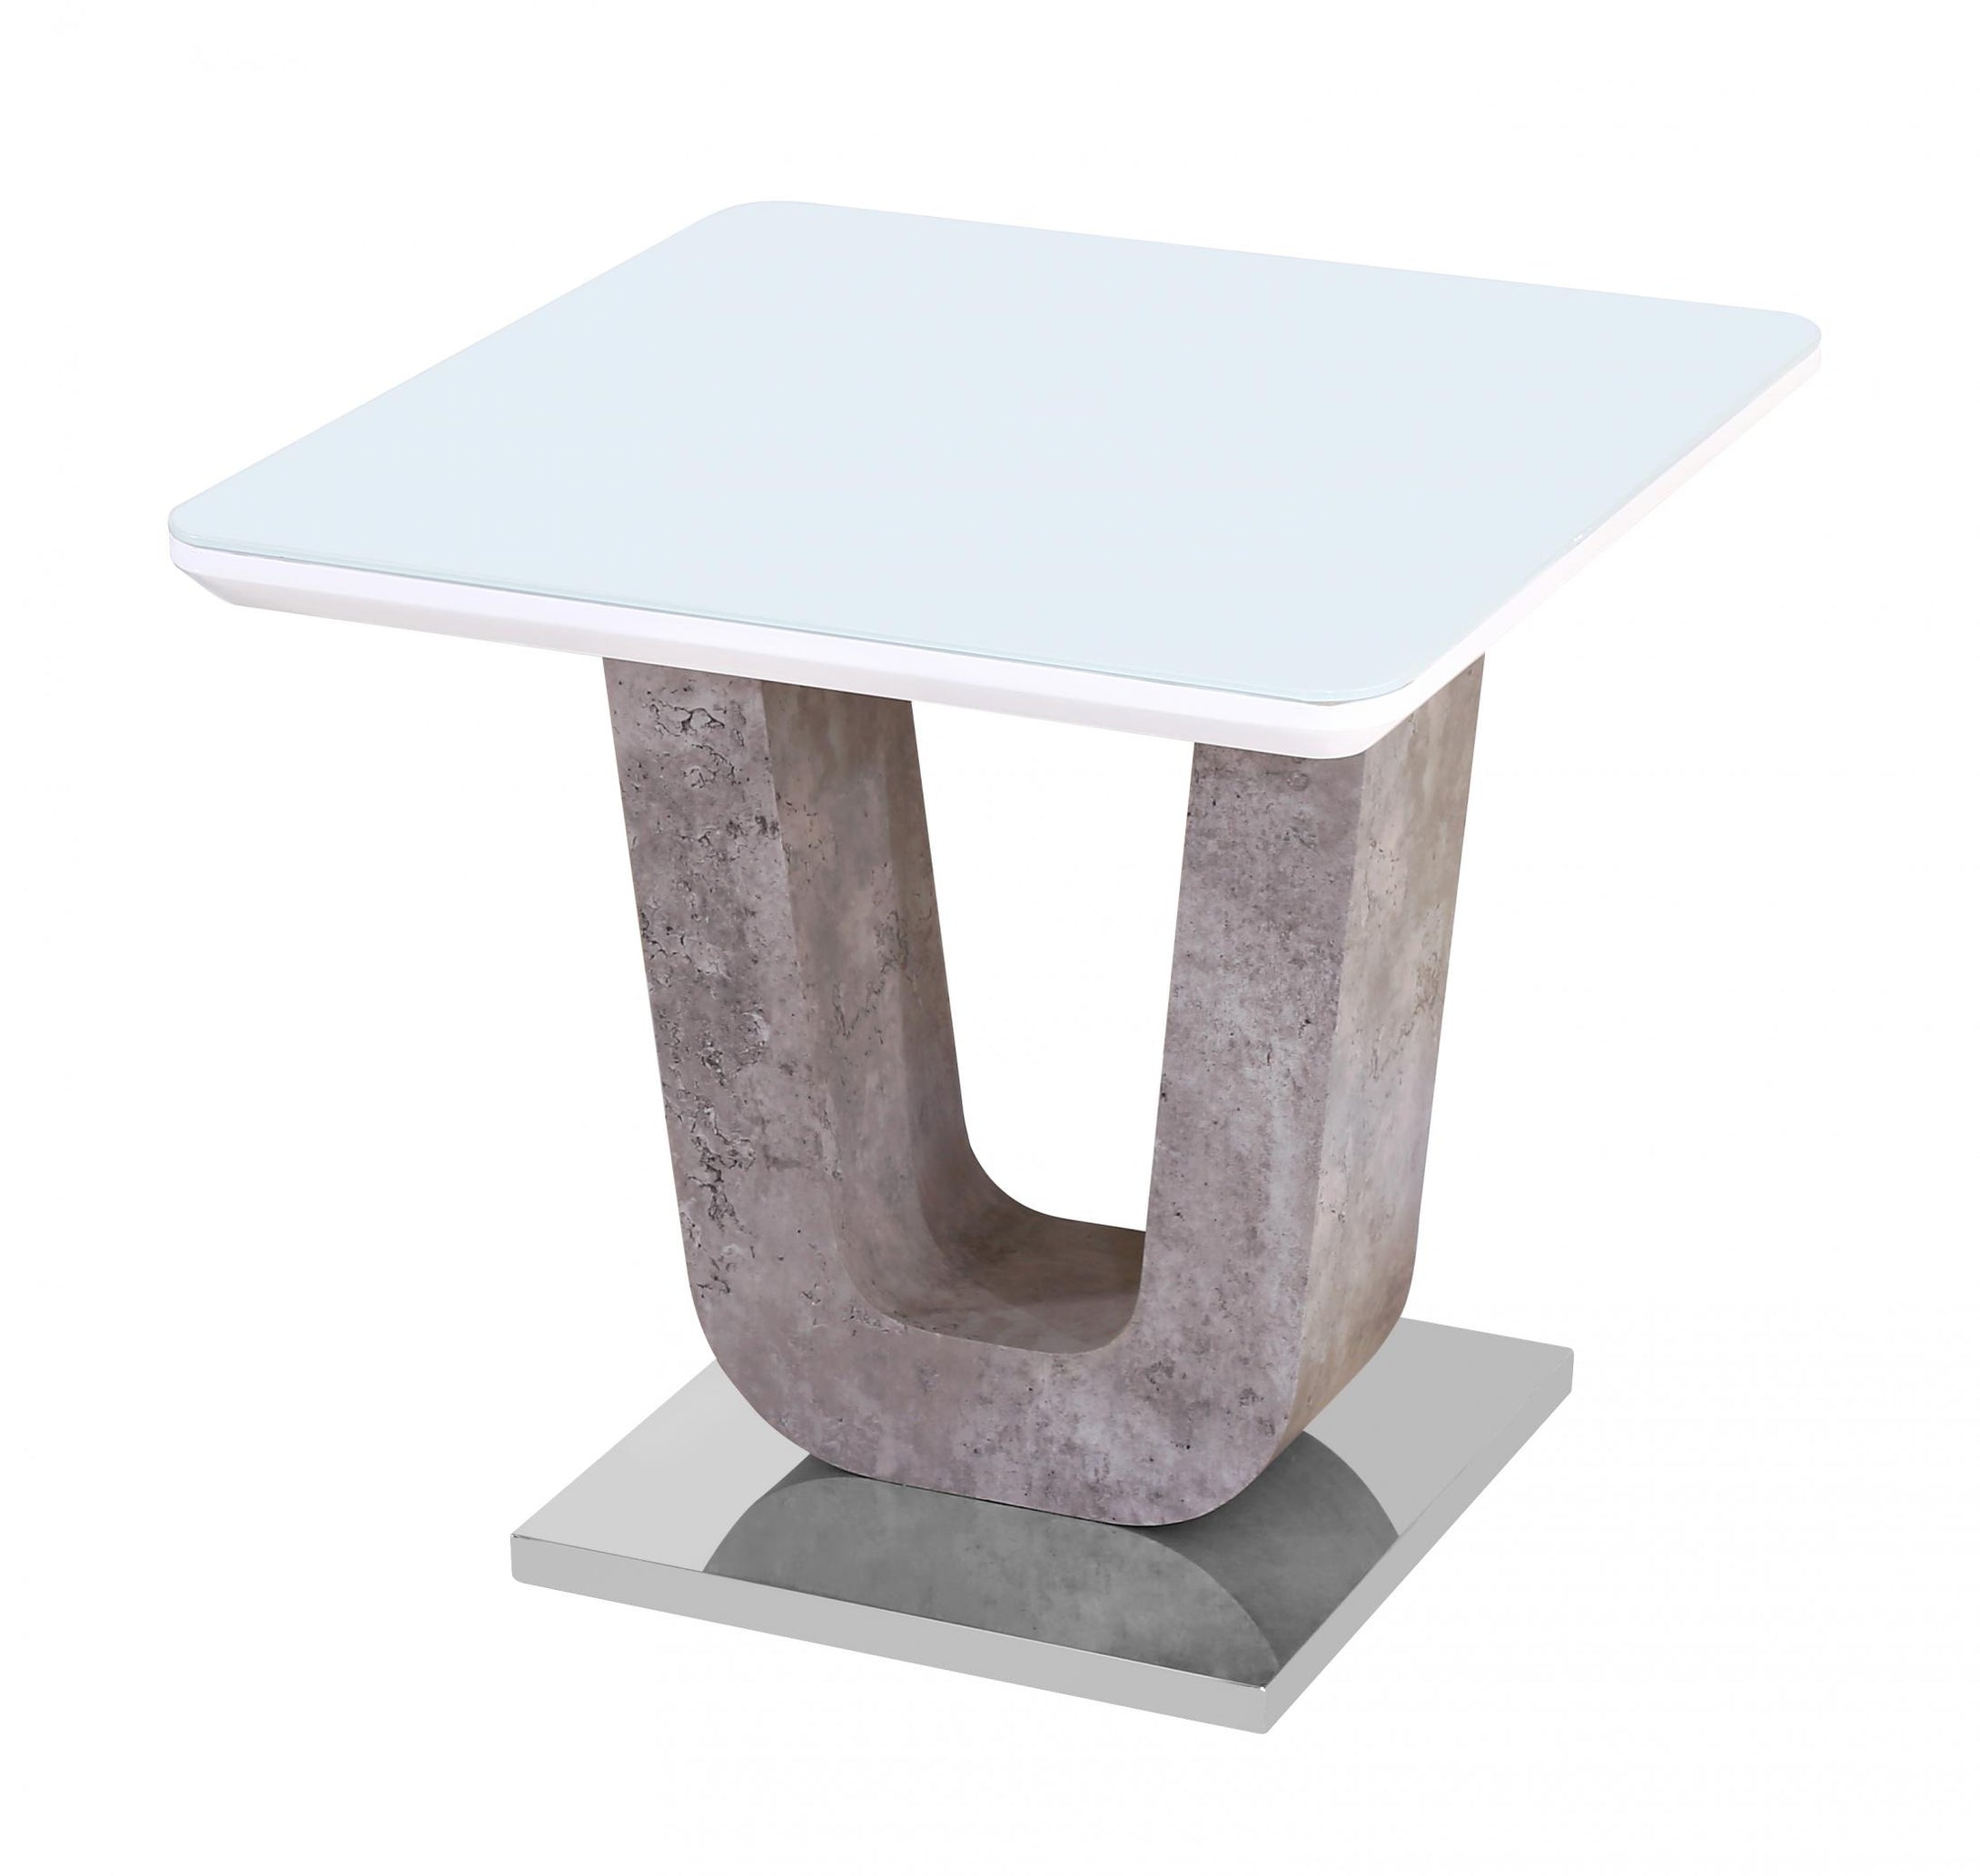 Topaz White Glass Lamp Table with Stone Effect